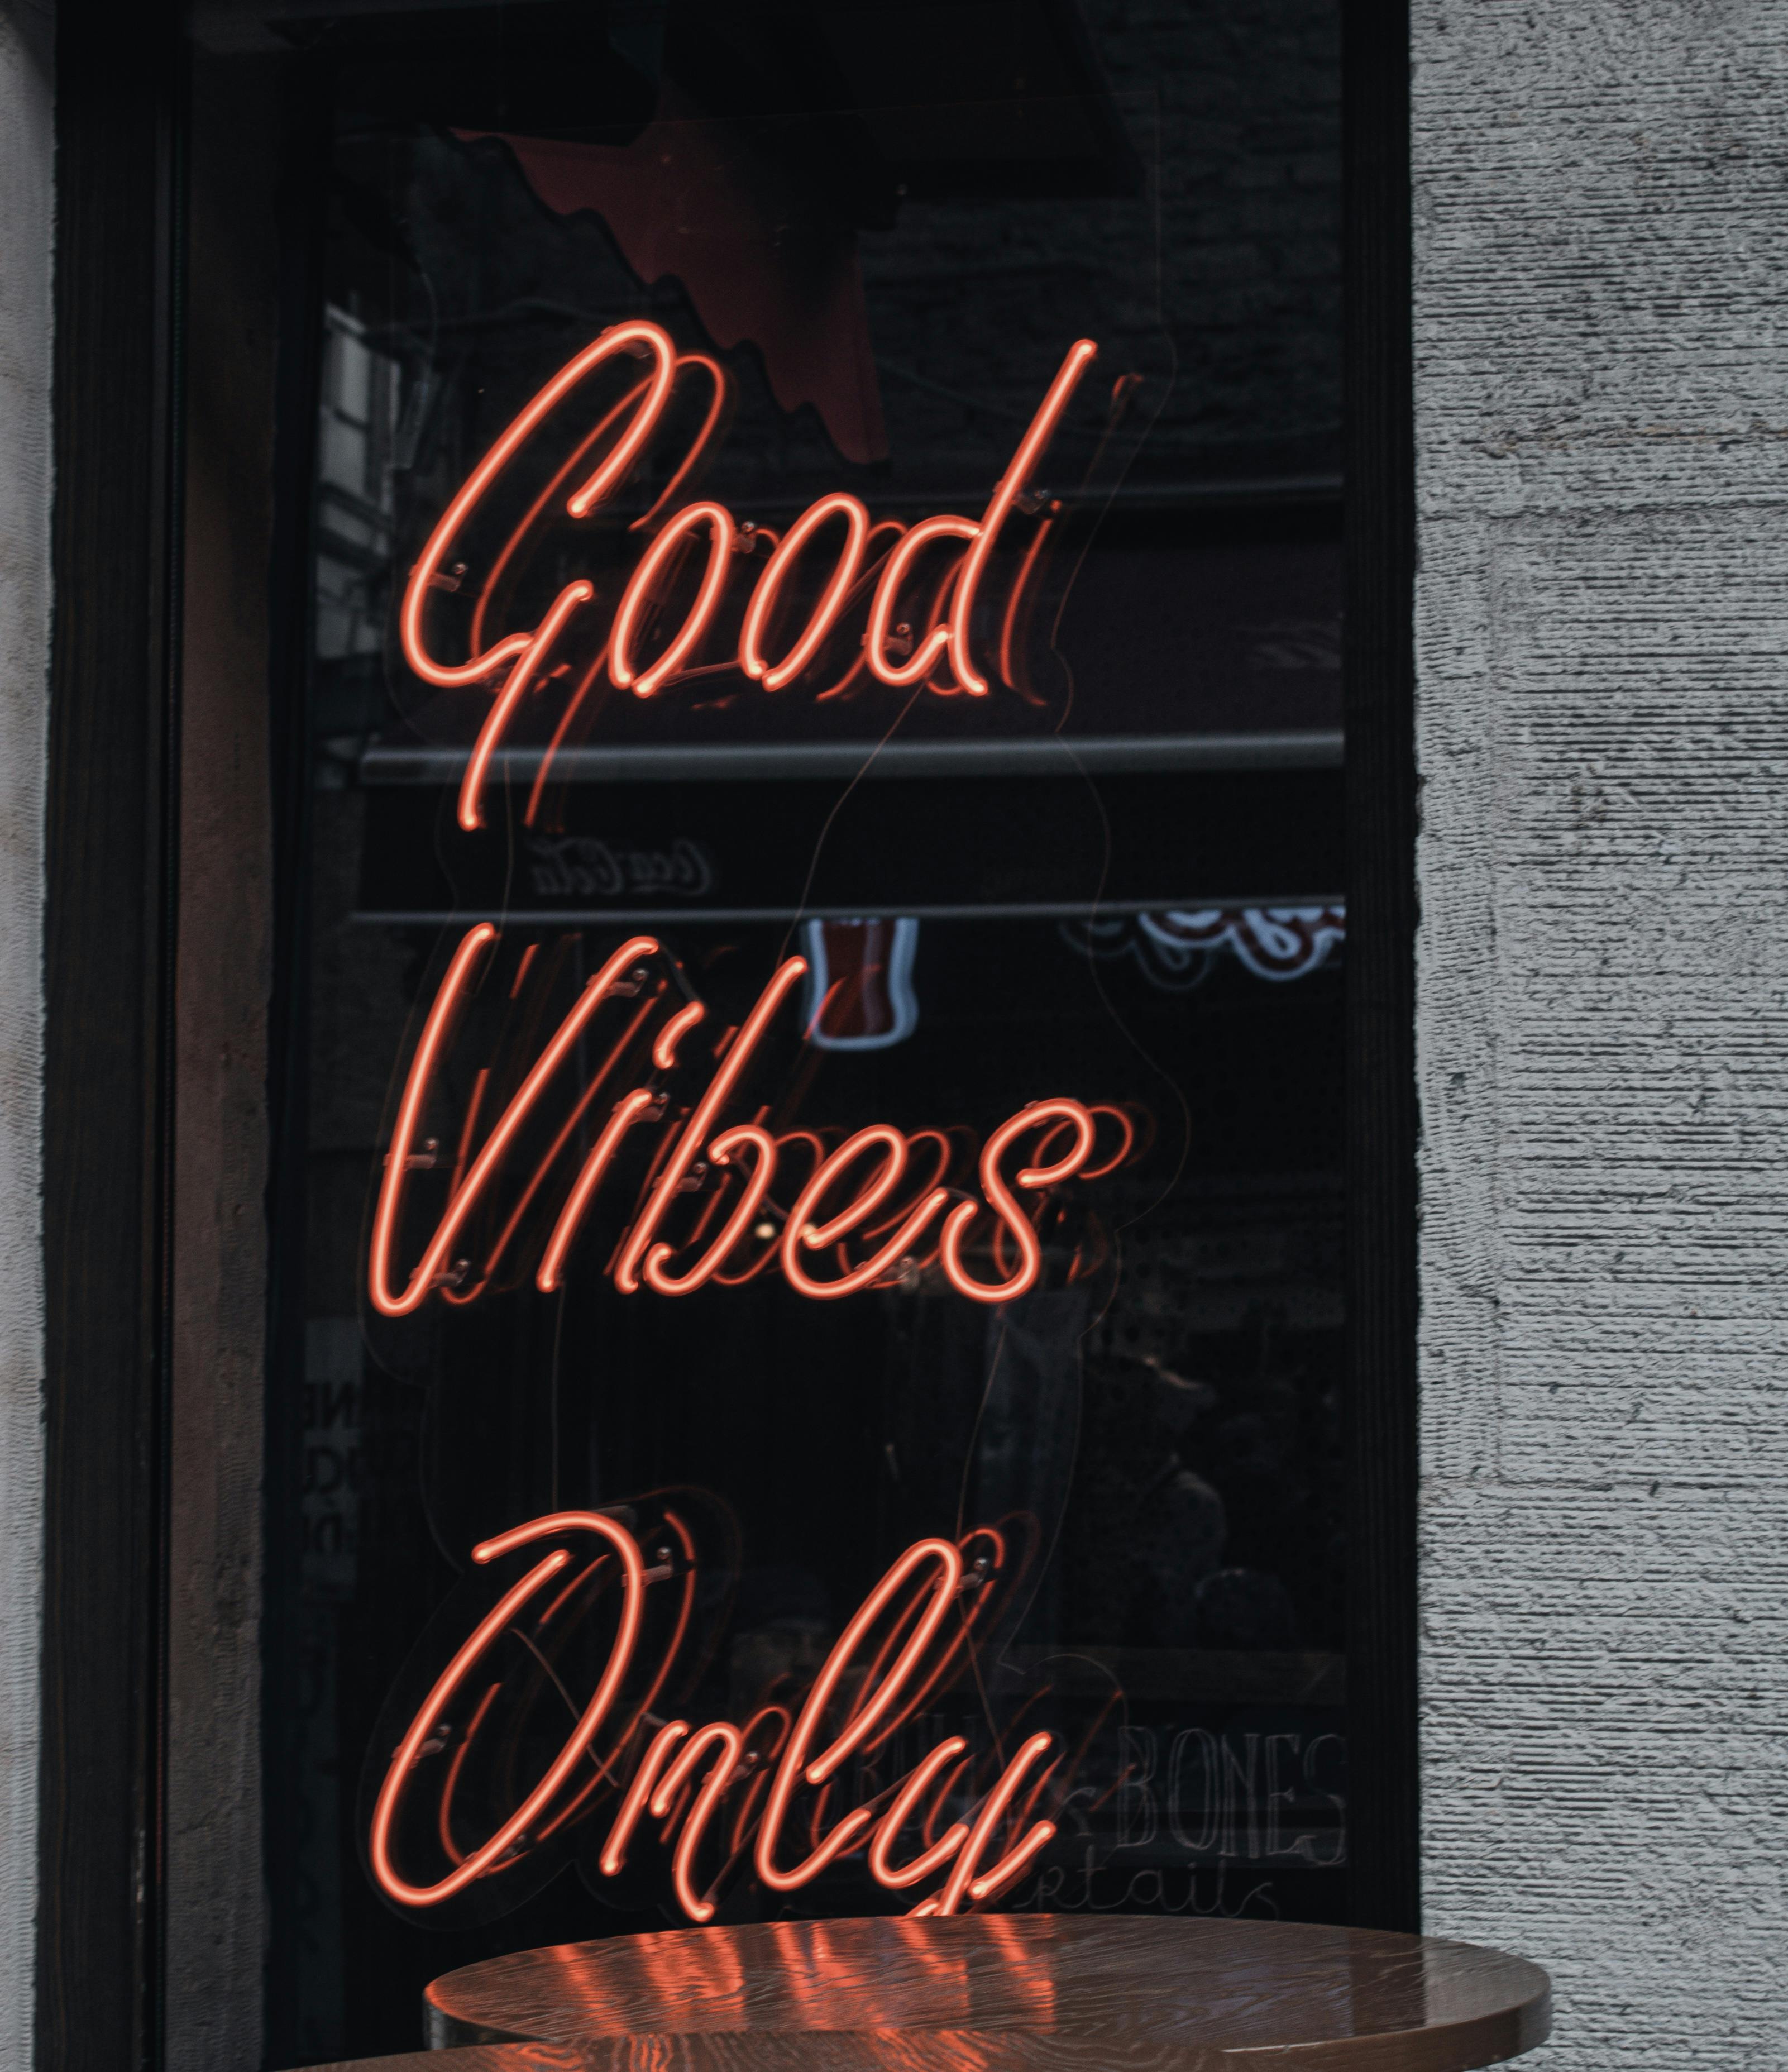 Buy Good Vibes Phone Wallpaper Online in India  Etsy